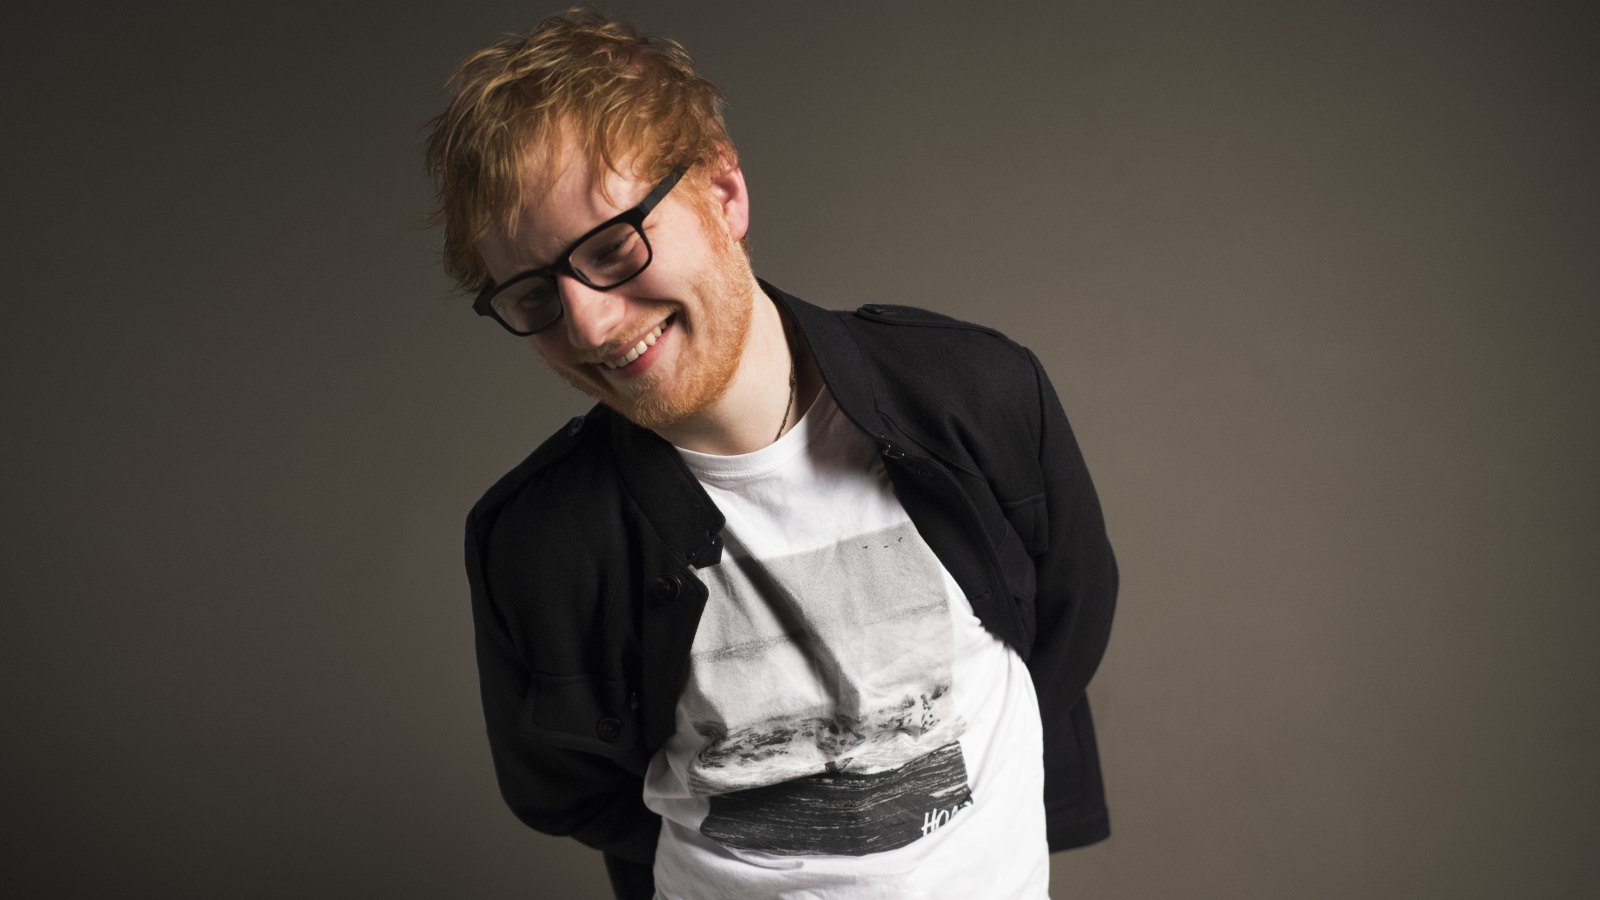 Ed Sheeran Releases Two Songs, First New Music Since 2015